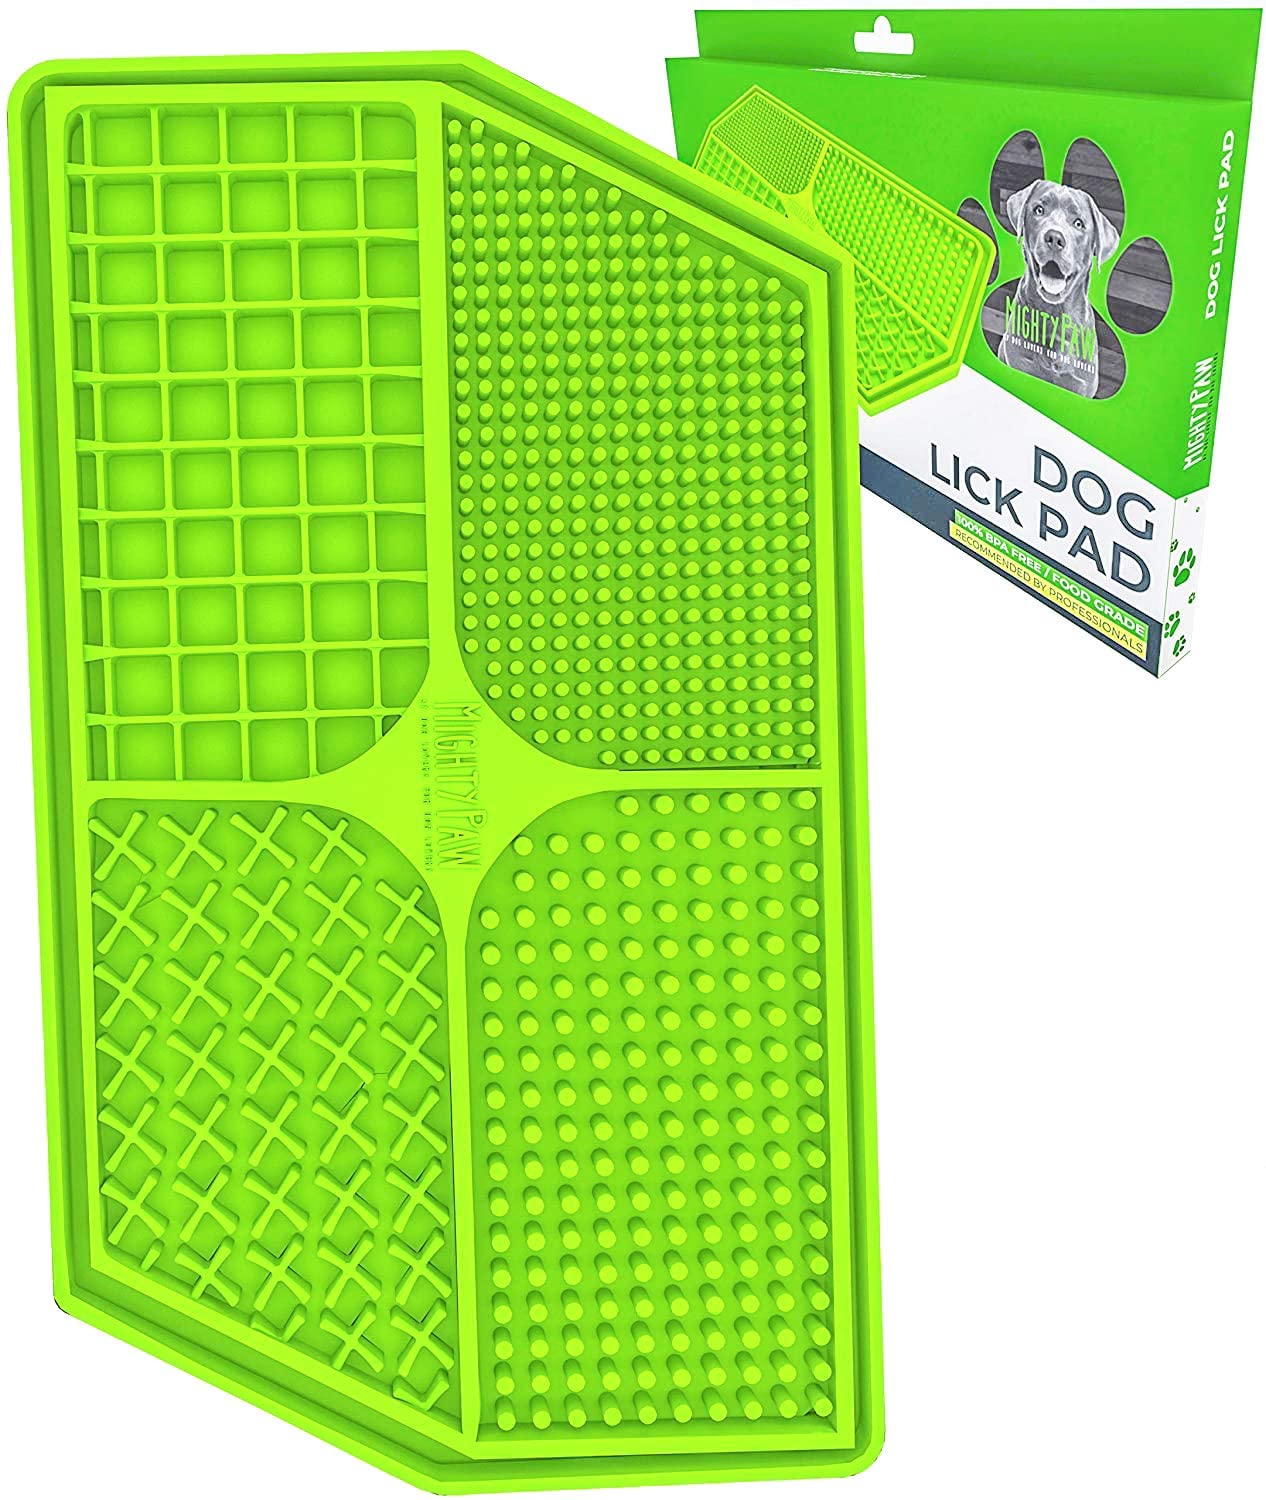 Calming Dog Lick Pad - Rescue with Four Textured Quadrants